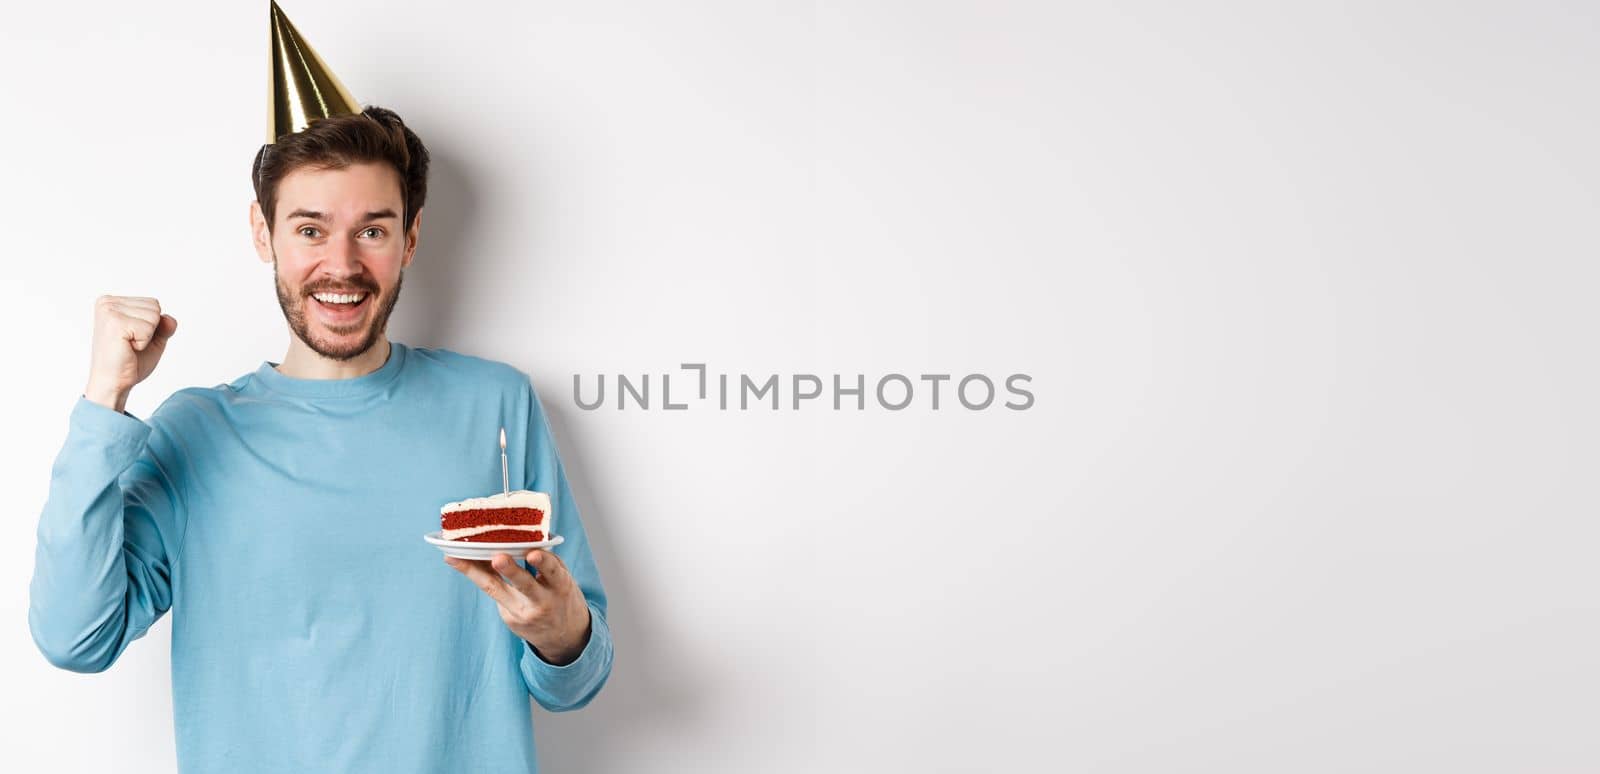 Celebration and holidays concept. Cheerful young man celebrating birthday in party hat, holding bday cake and looking happy, standing on white background.